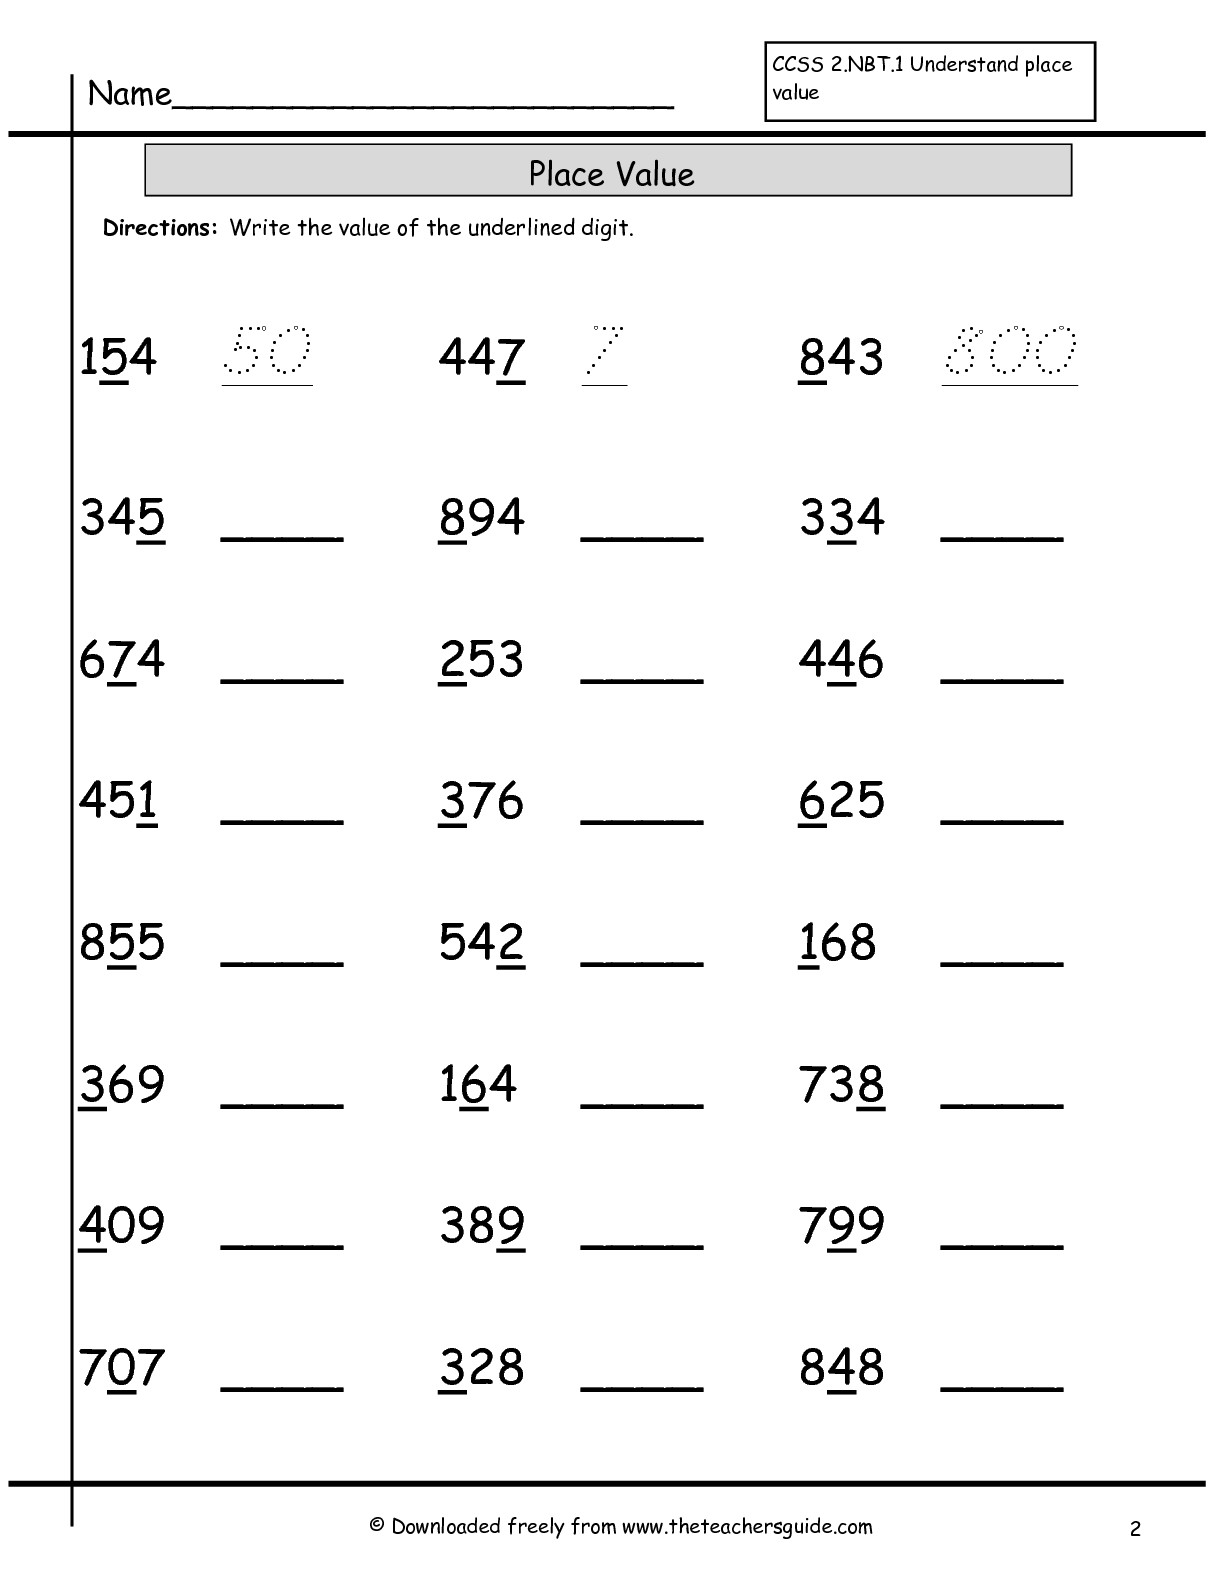 place-value-of-whole-numbers-worksheet-grade1to6